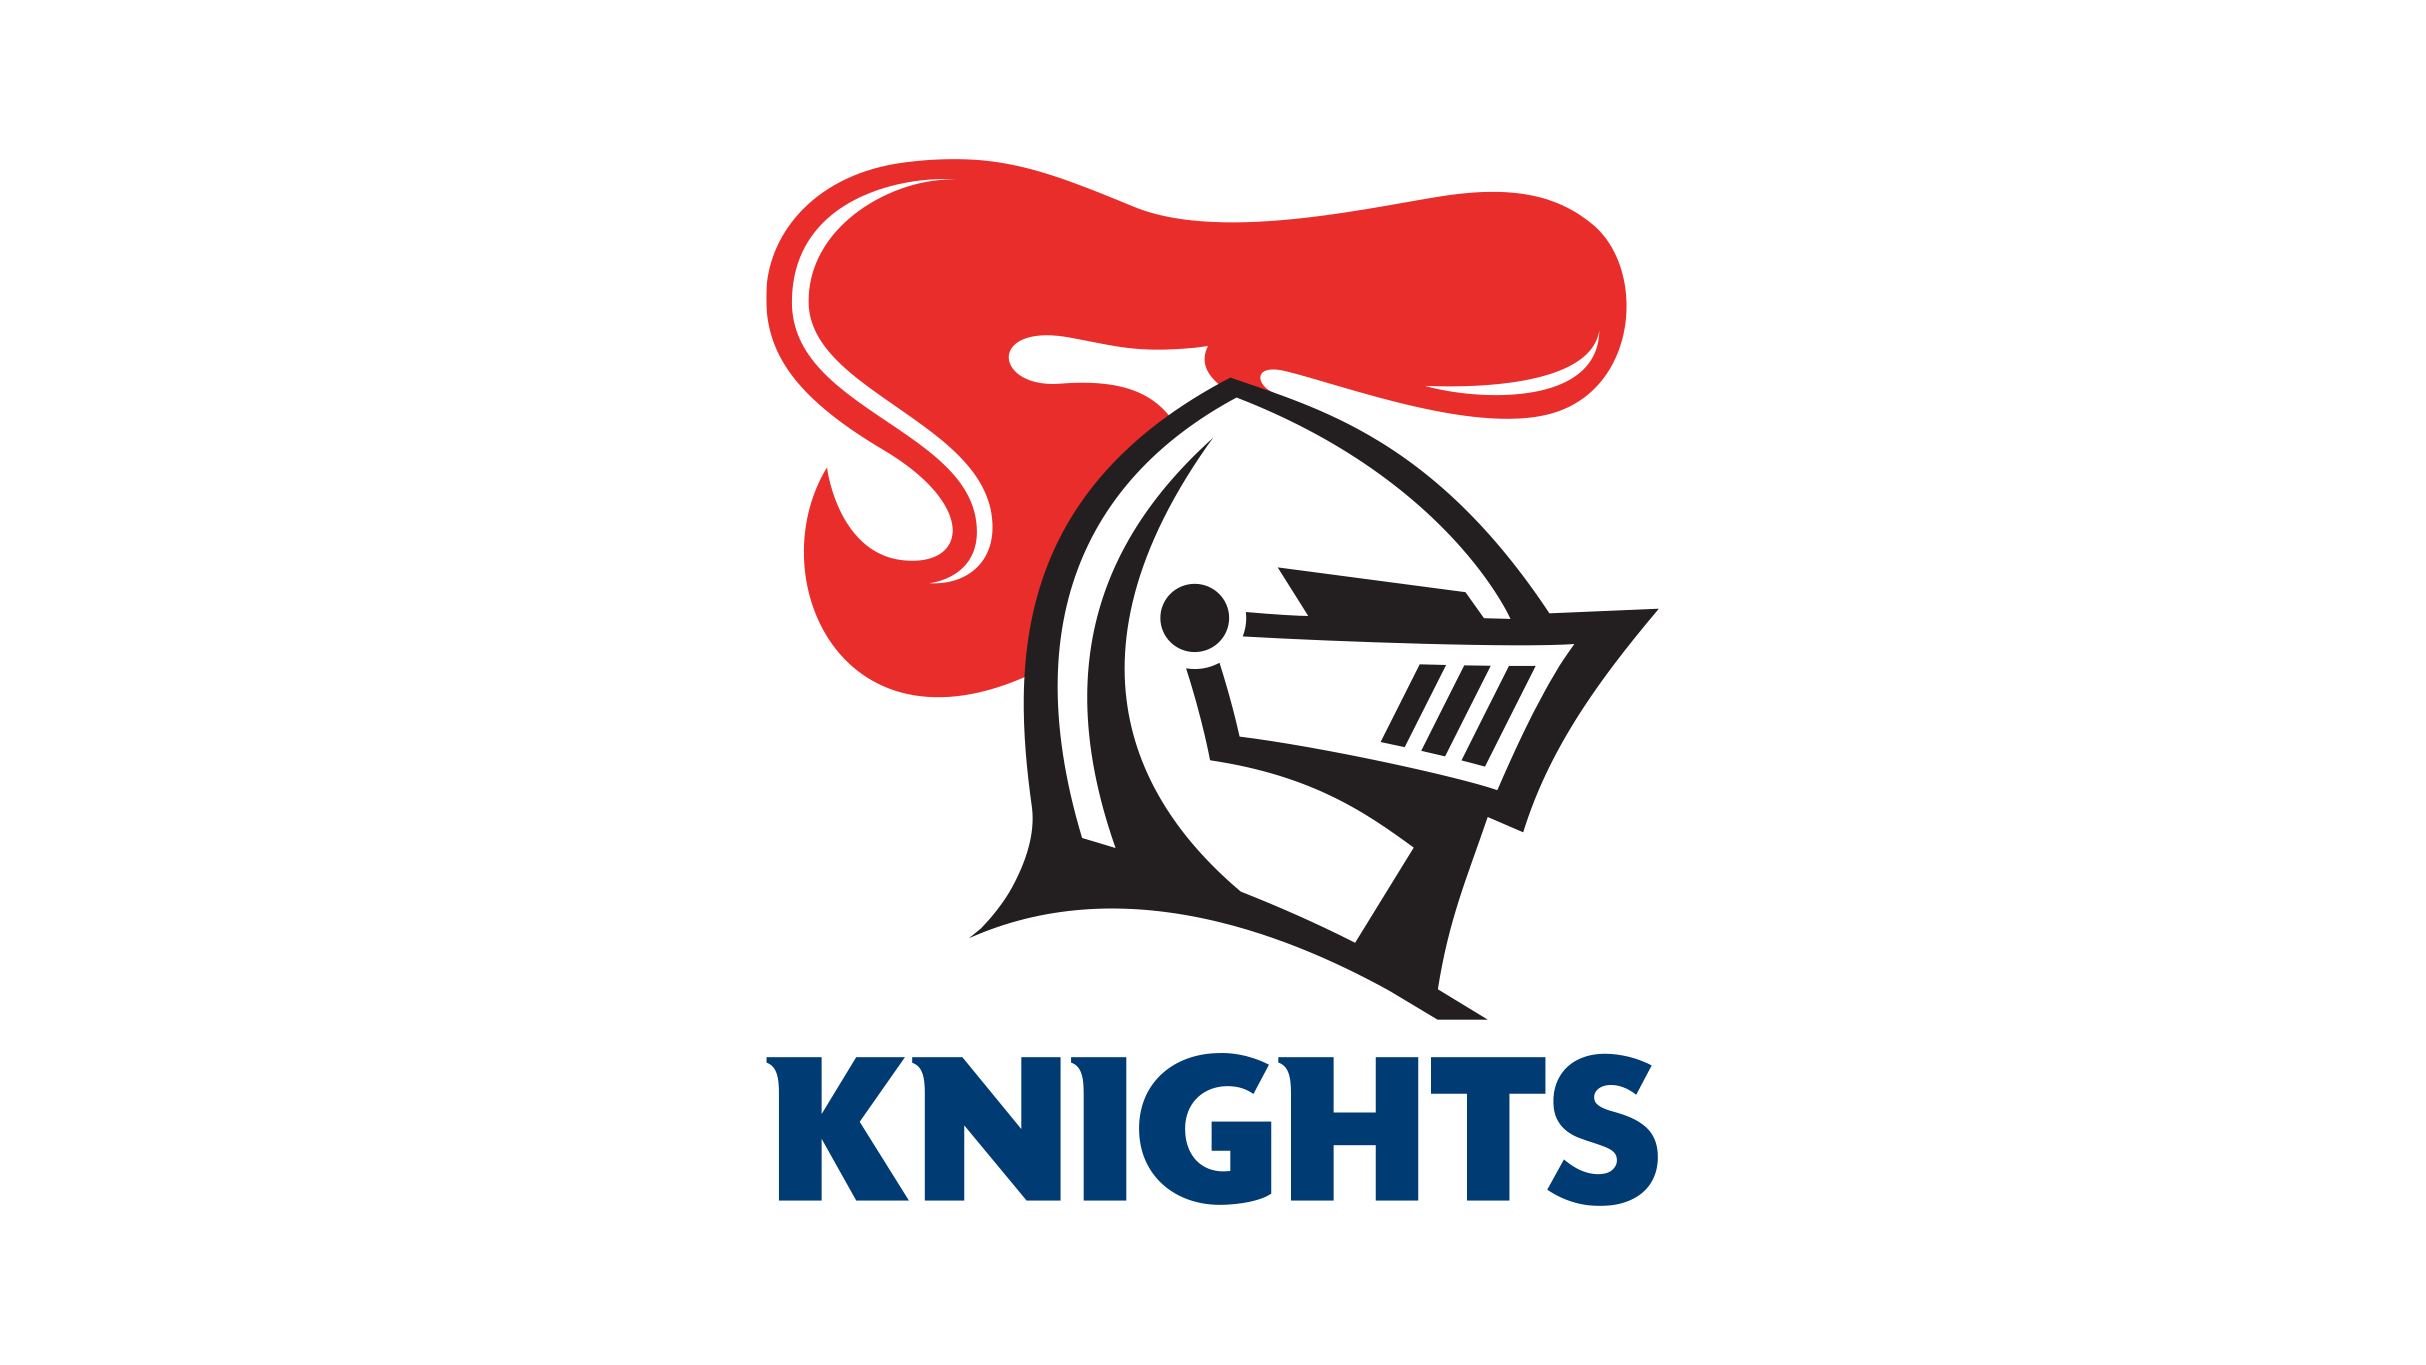 Newcastle Knights v Canterbury Bulldogs in Newcastle promo photo for Knights Members presale offer code